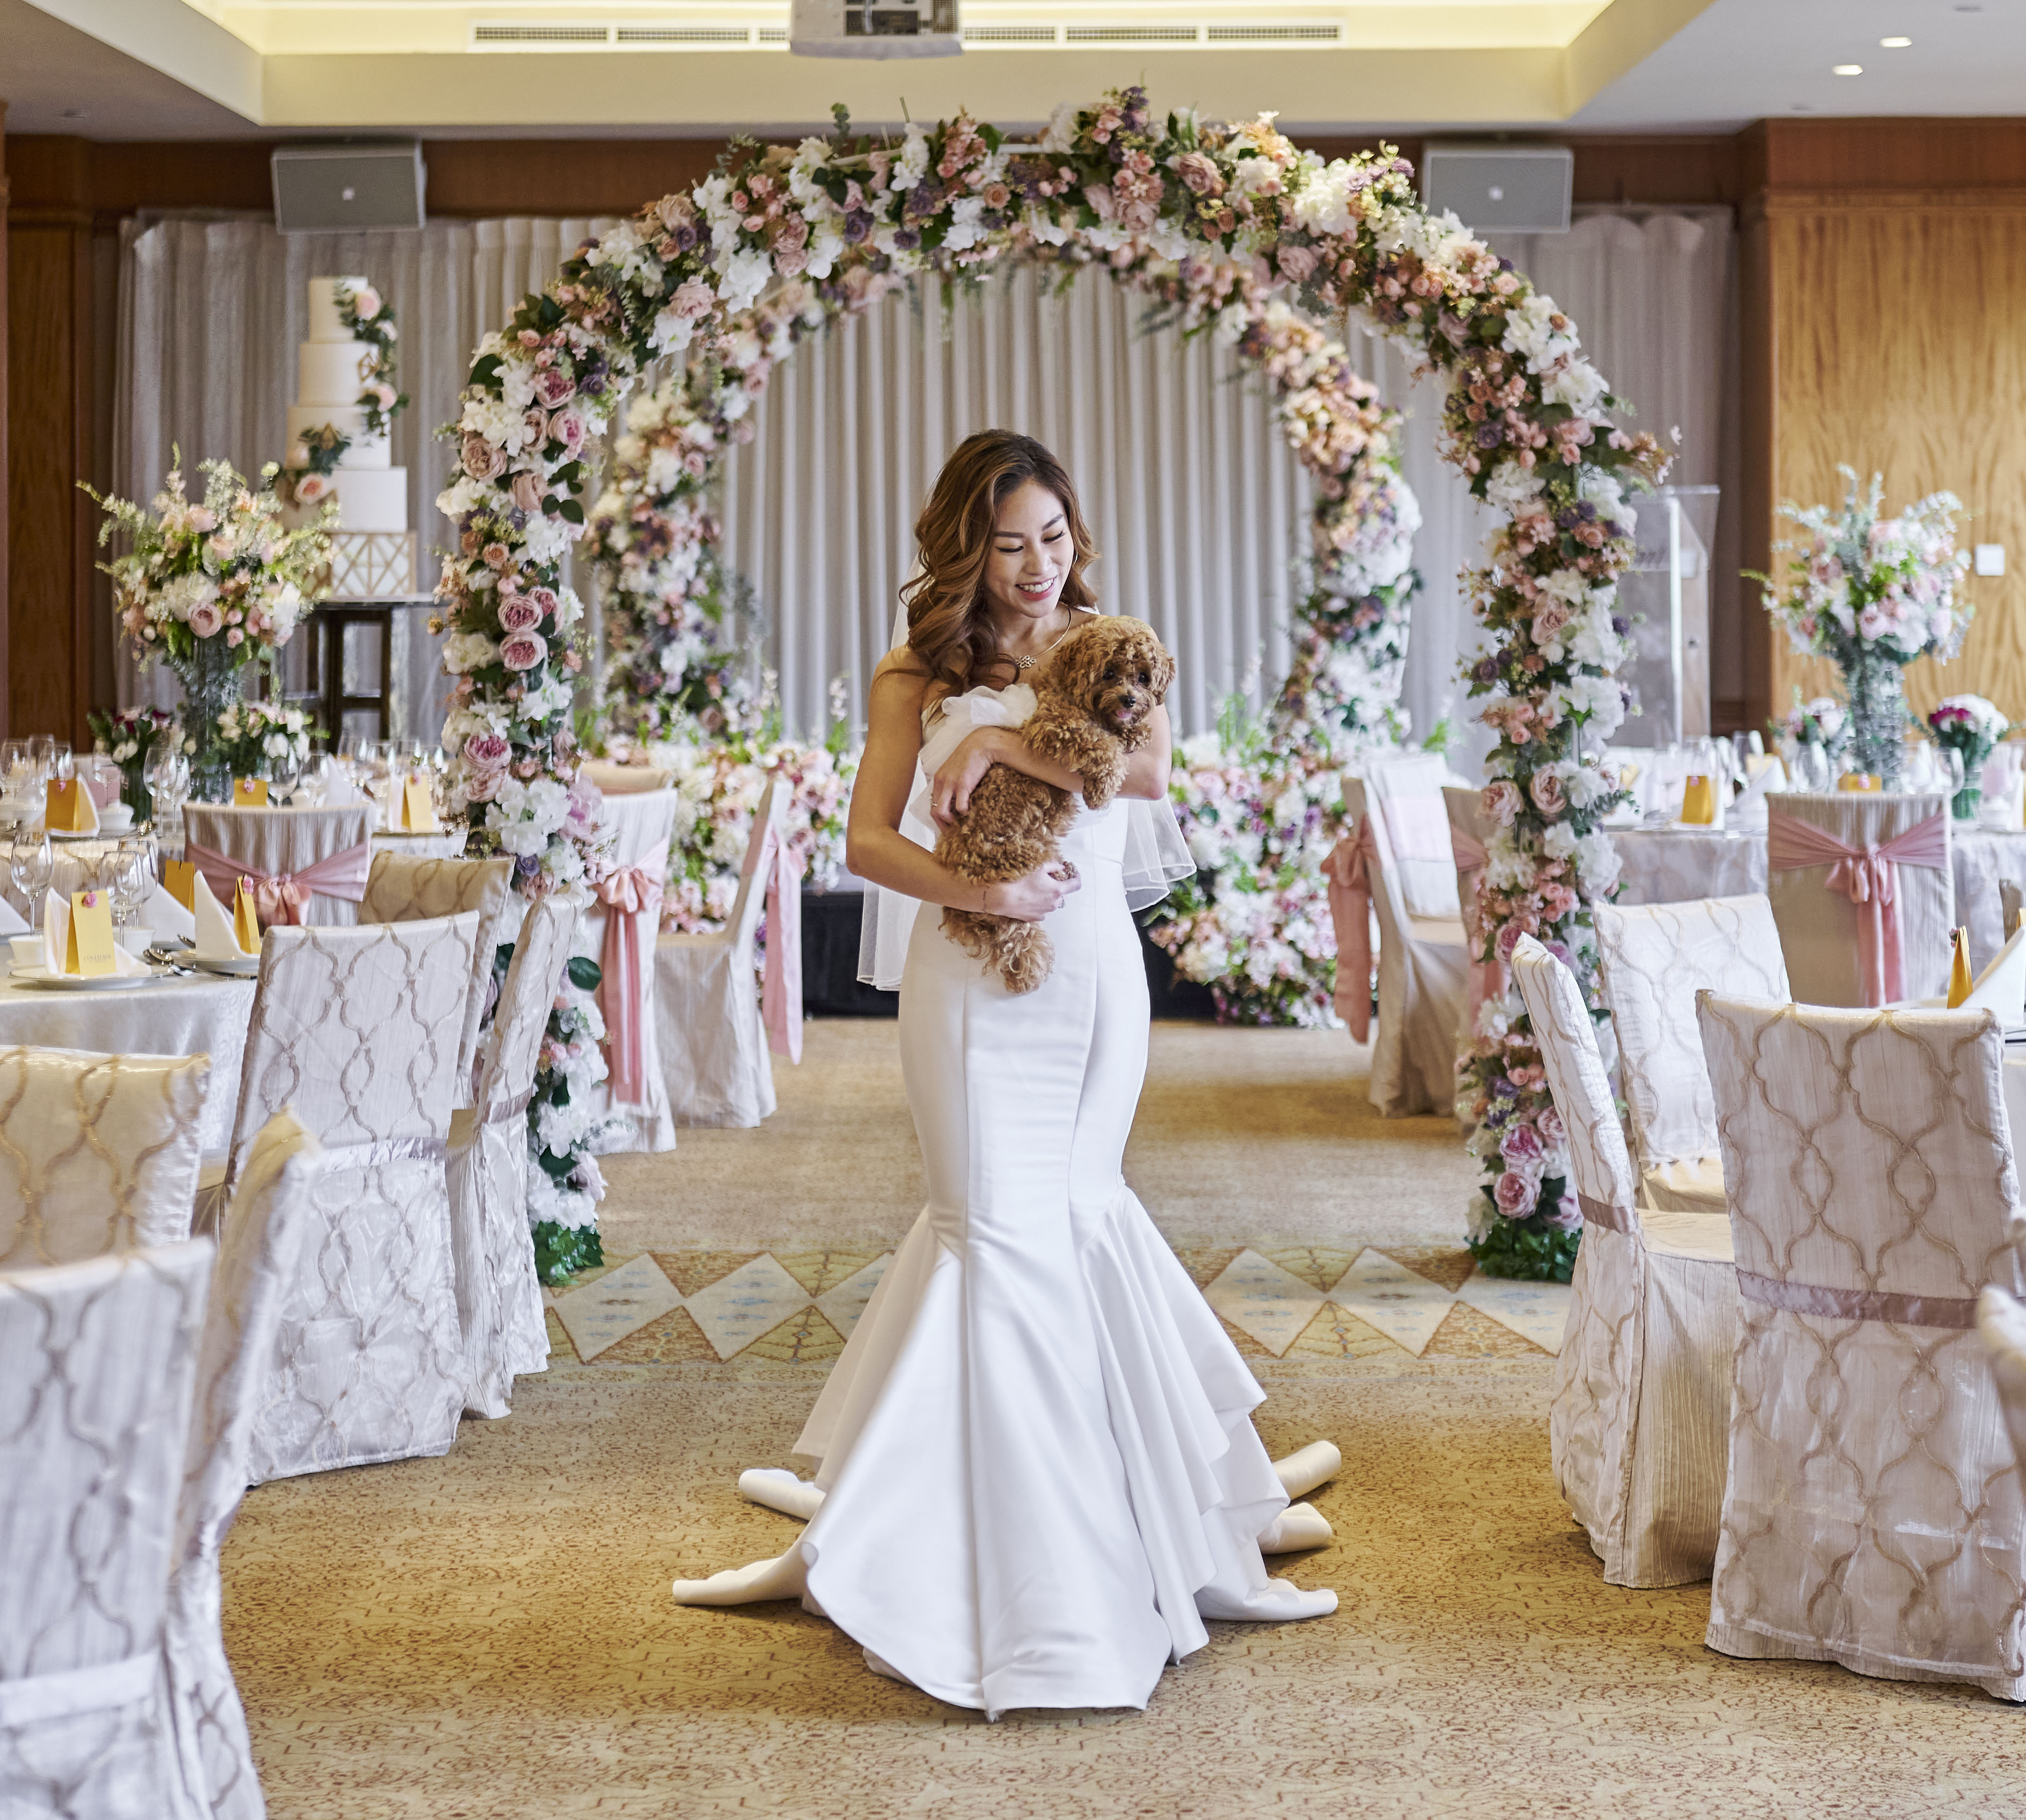 Asian bride in a white wedding dress craddling a small dog in the Tanglin meeting room